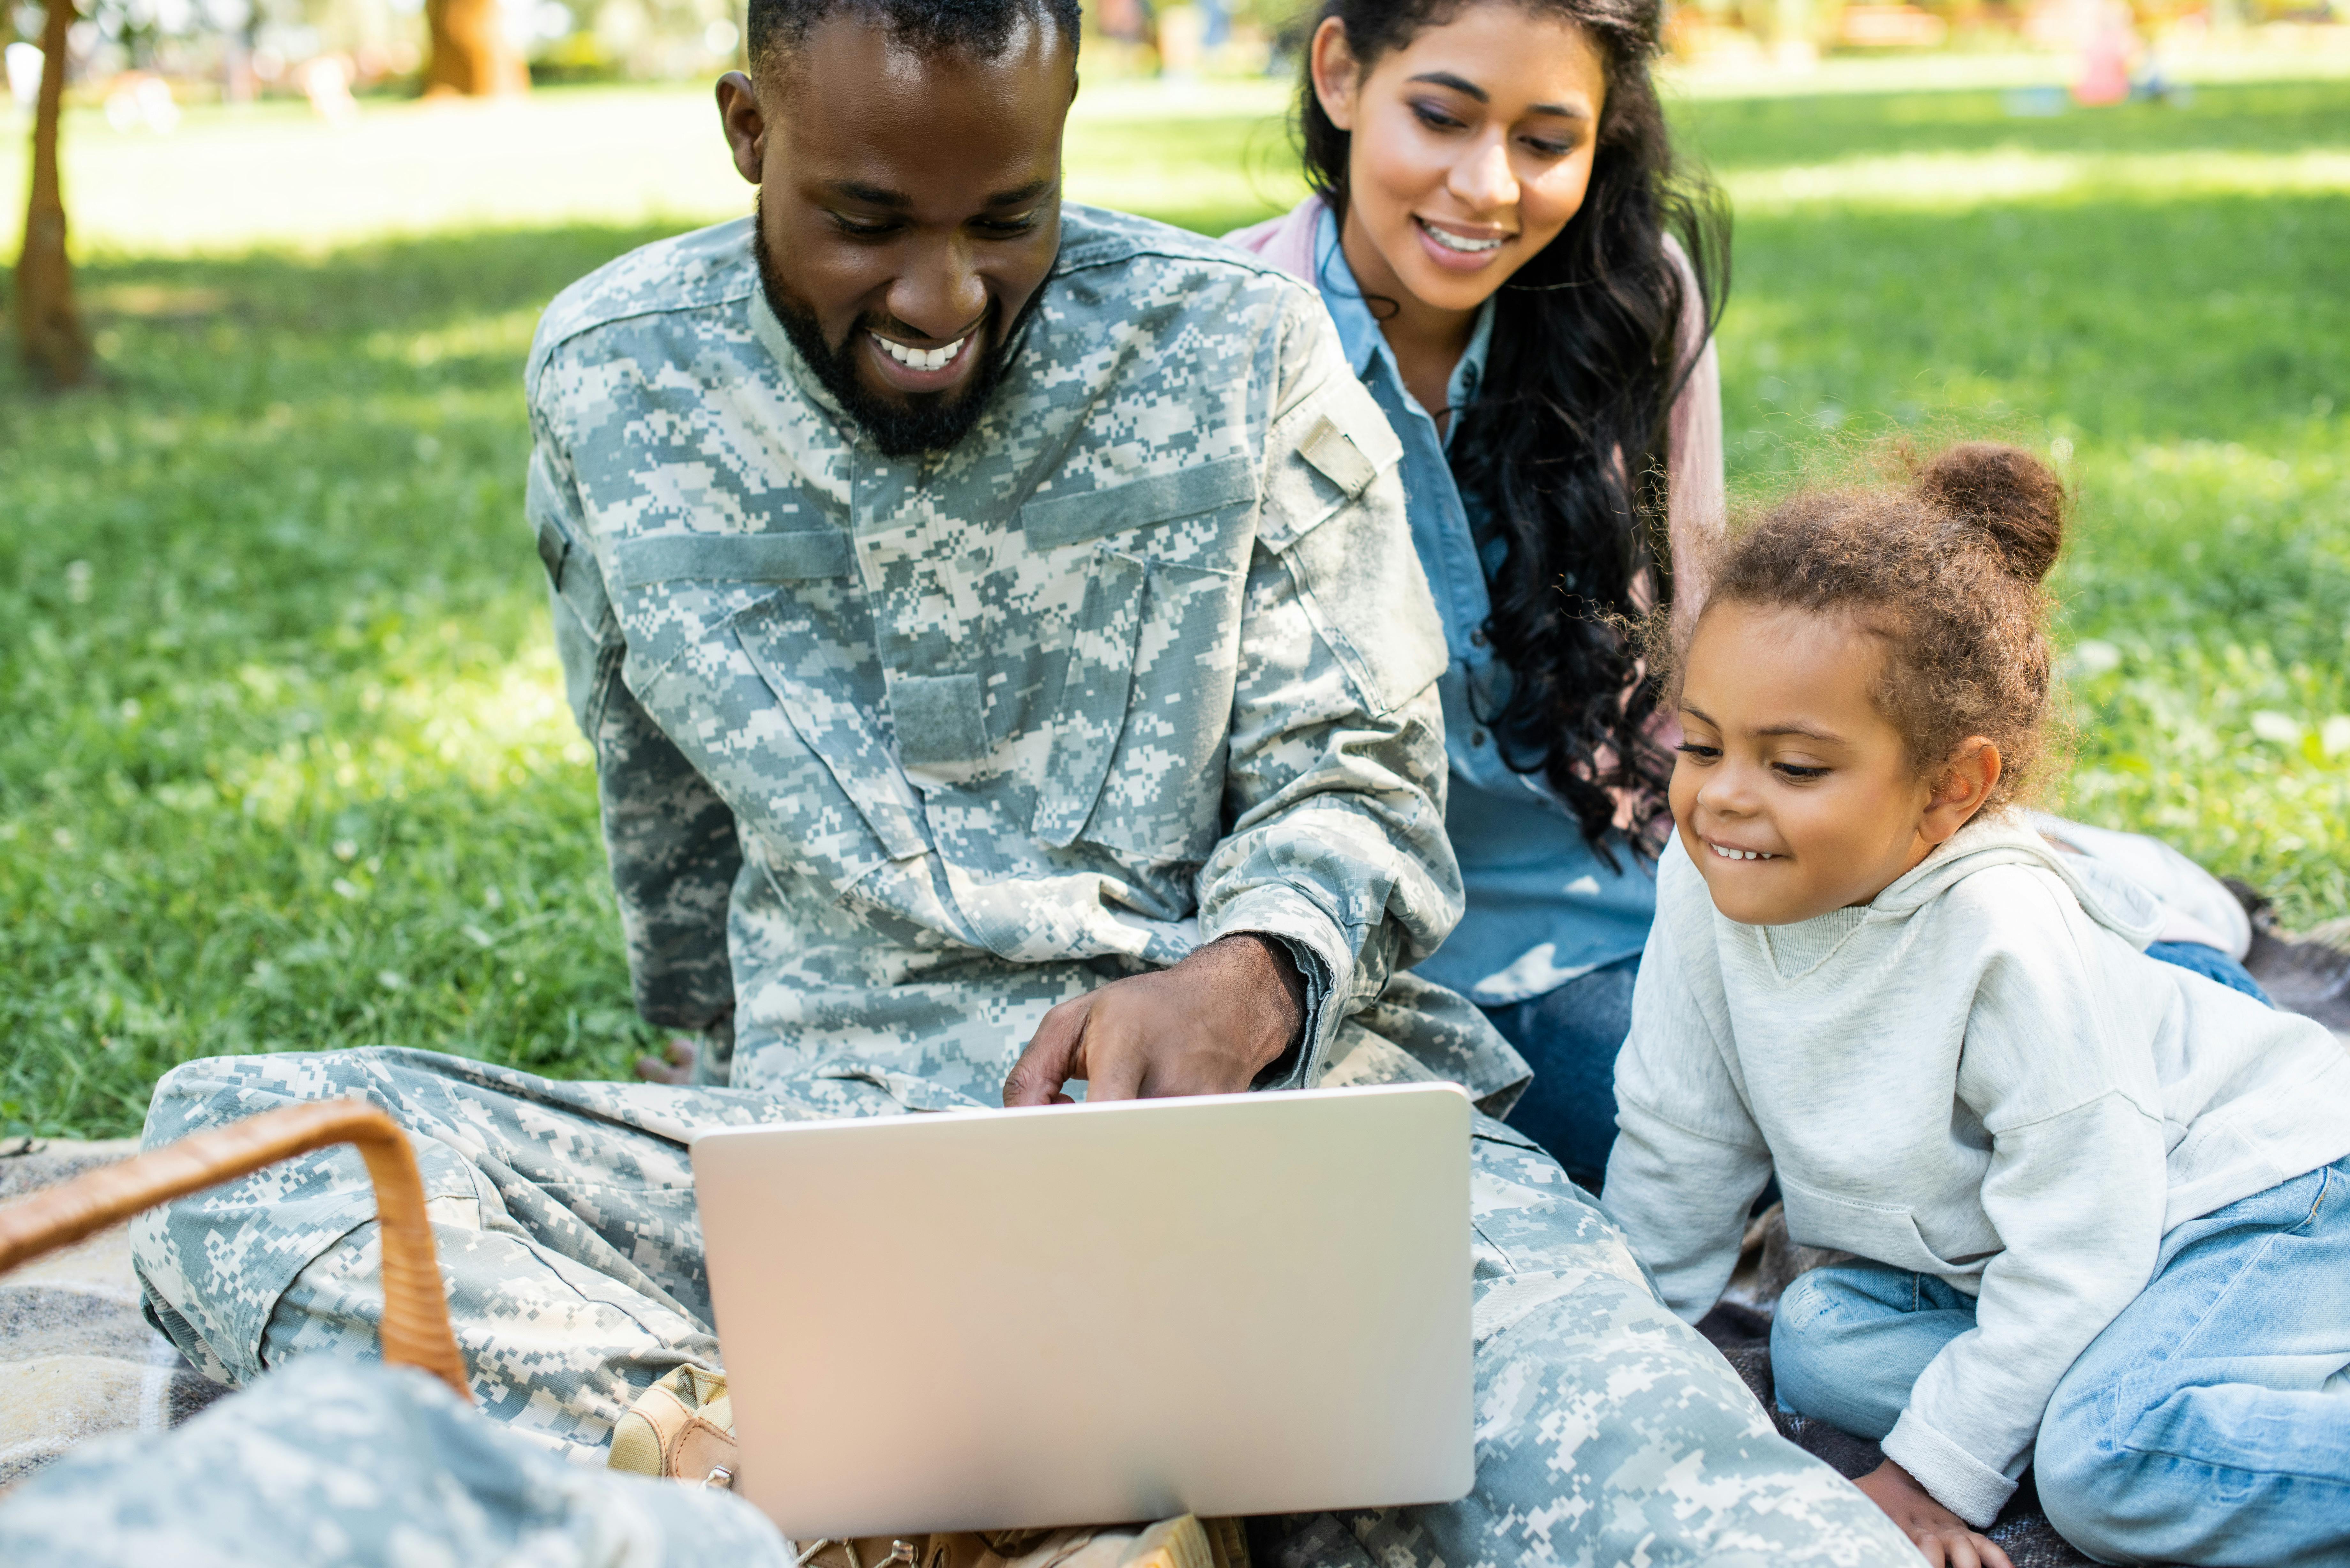 A family sitting on a lawn looking at a laptop computer